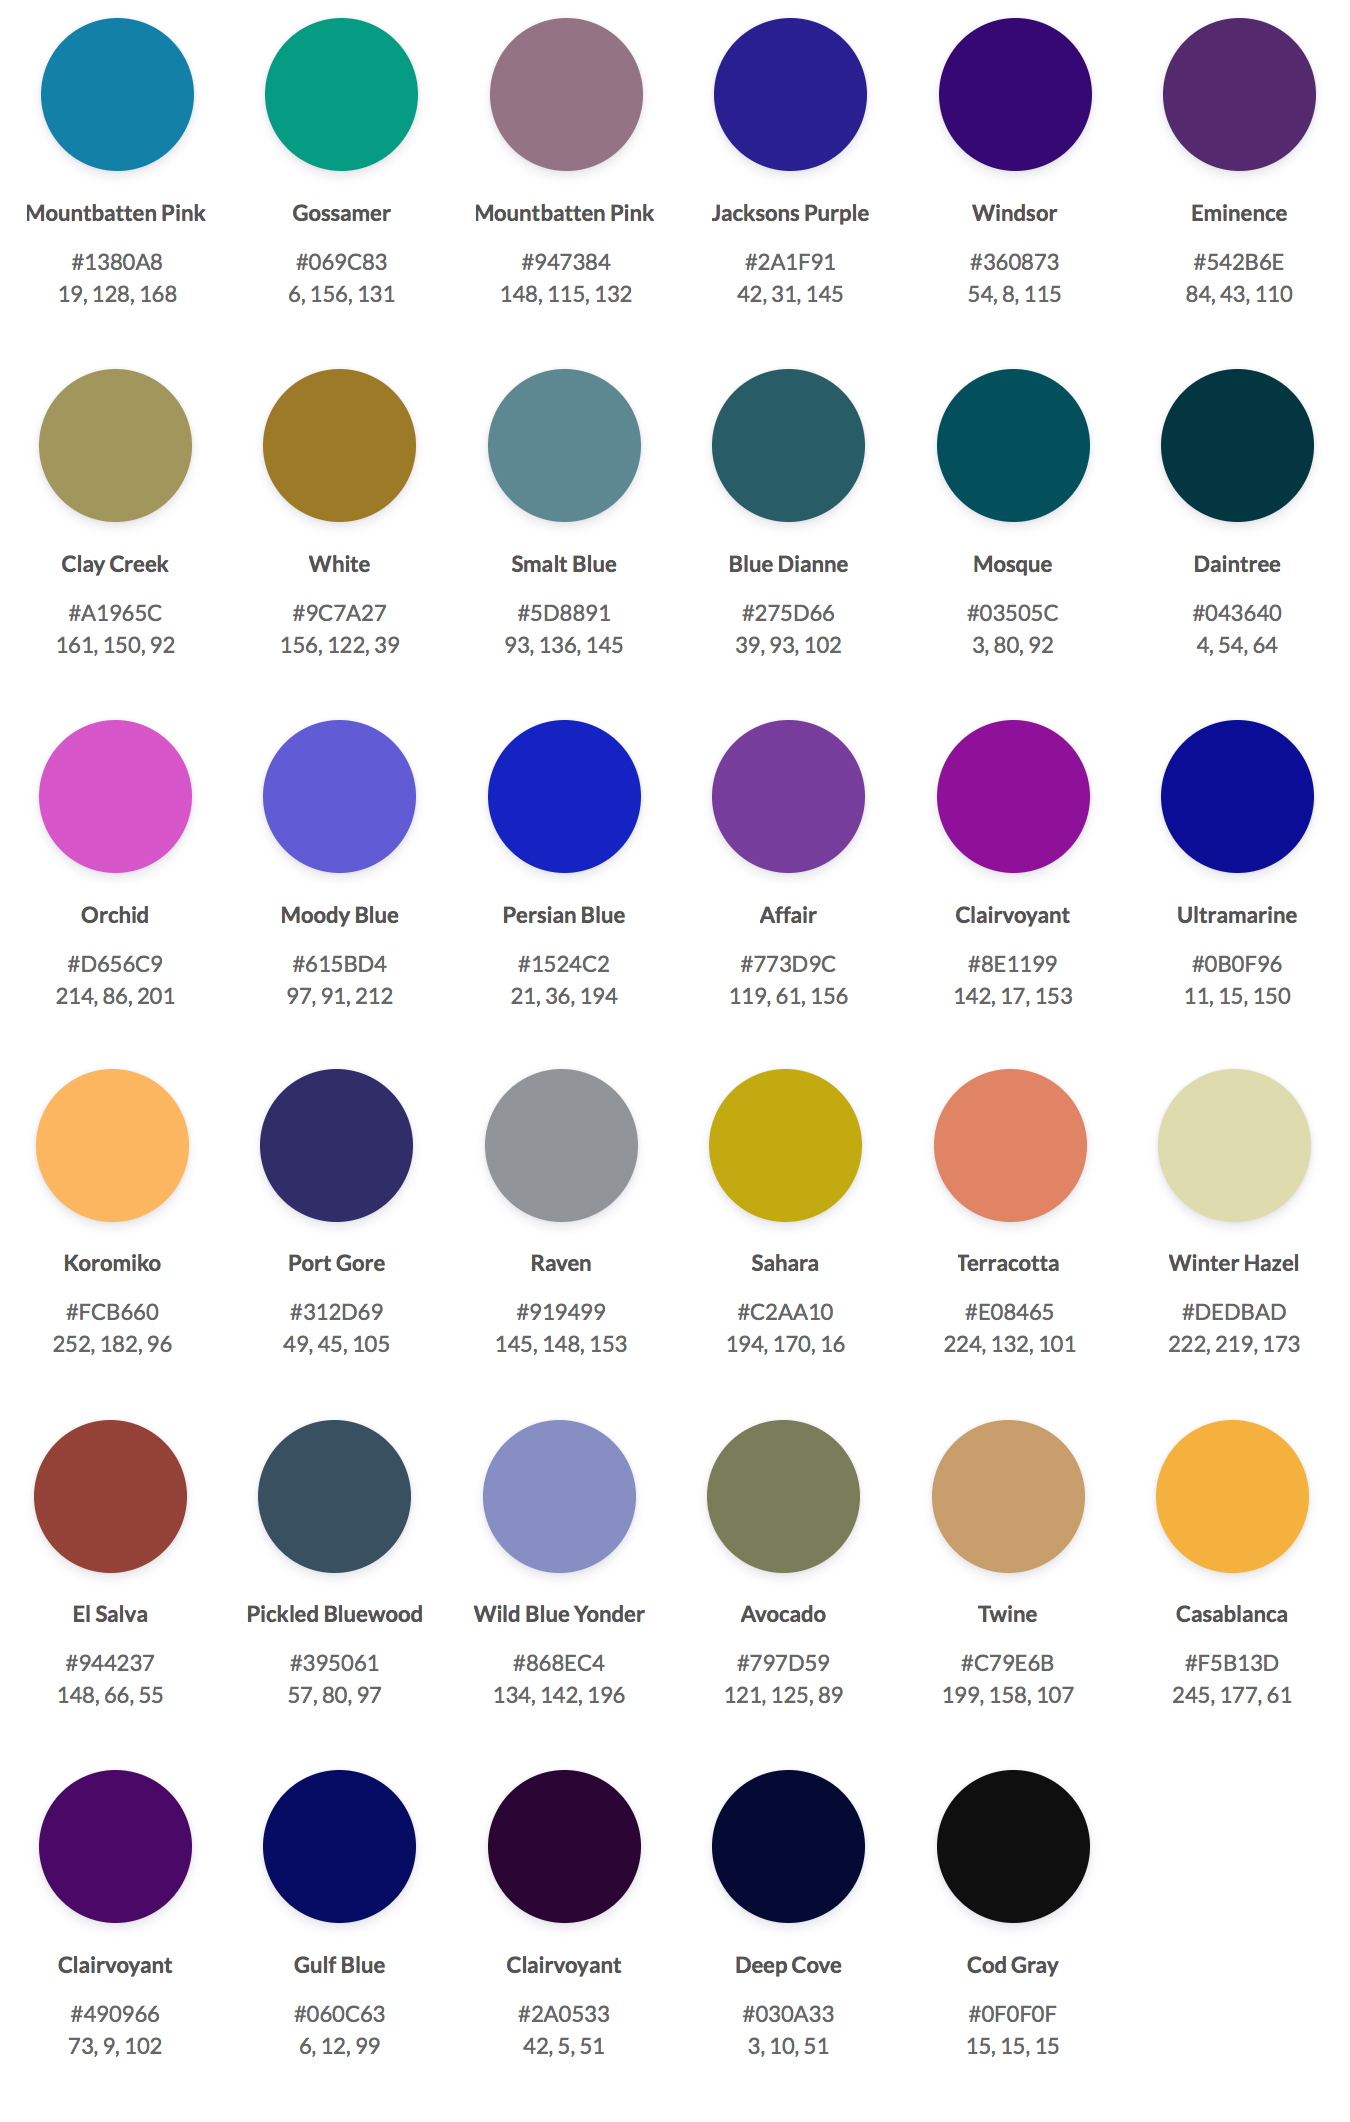 Try the New 2018 Trending Colors Palette |